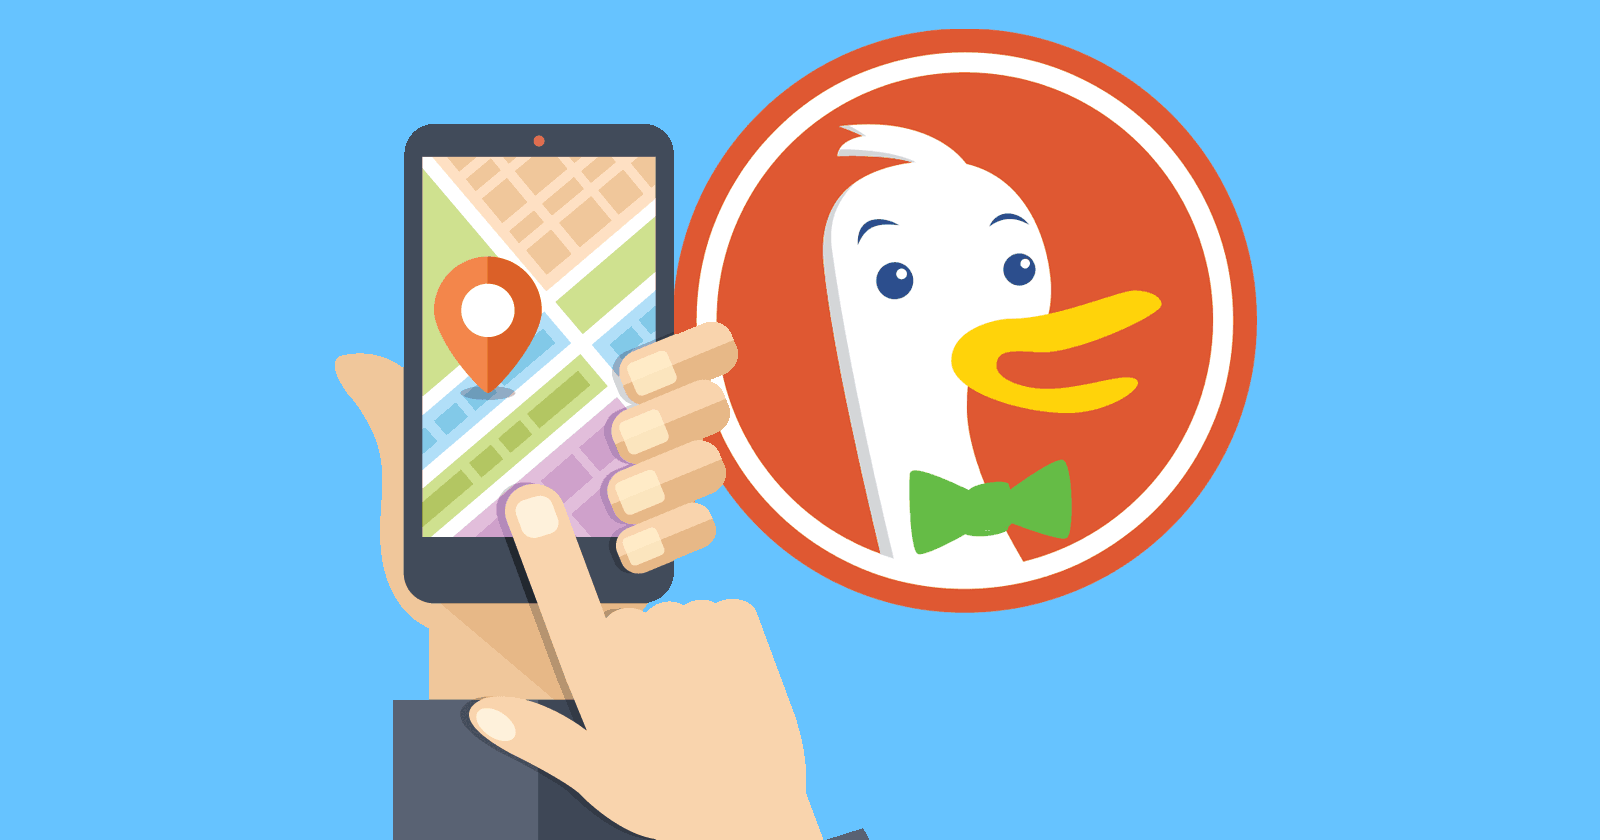 Image of a map on a mobile phone juxtaposed next to the Duck Duck Go logo